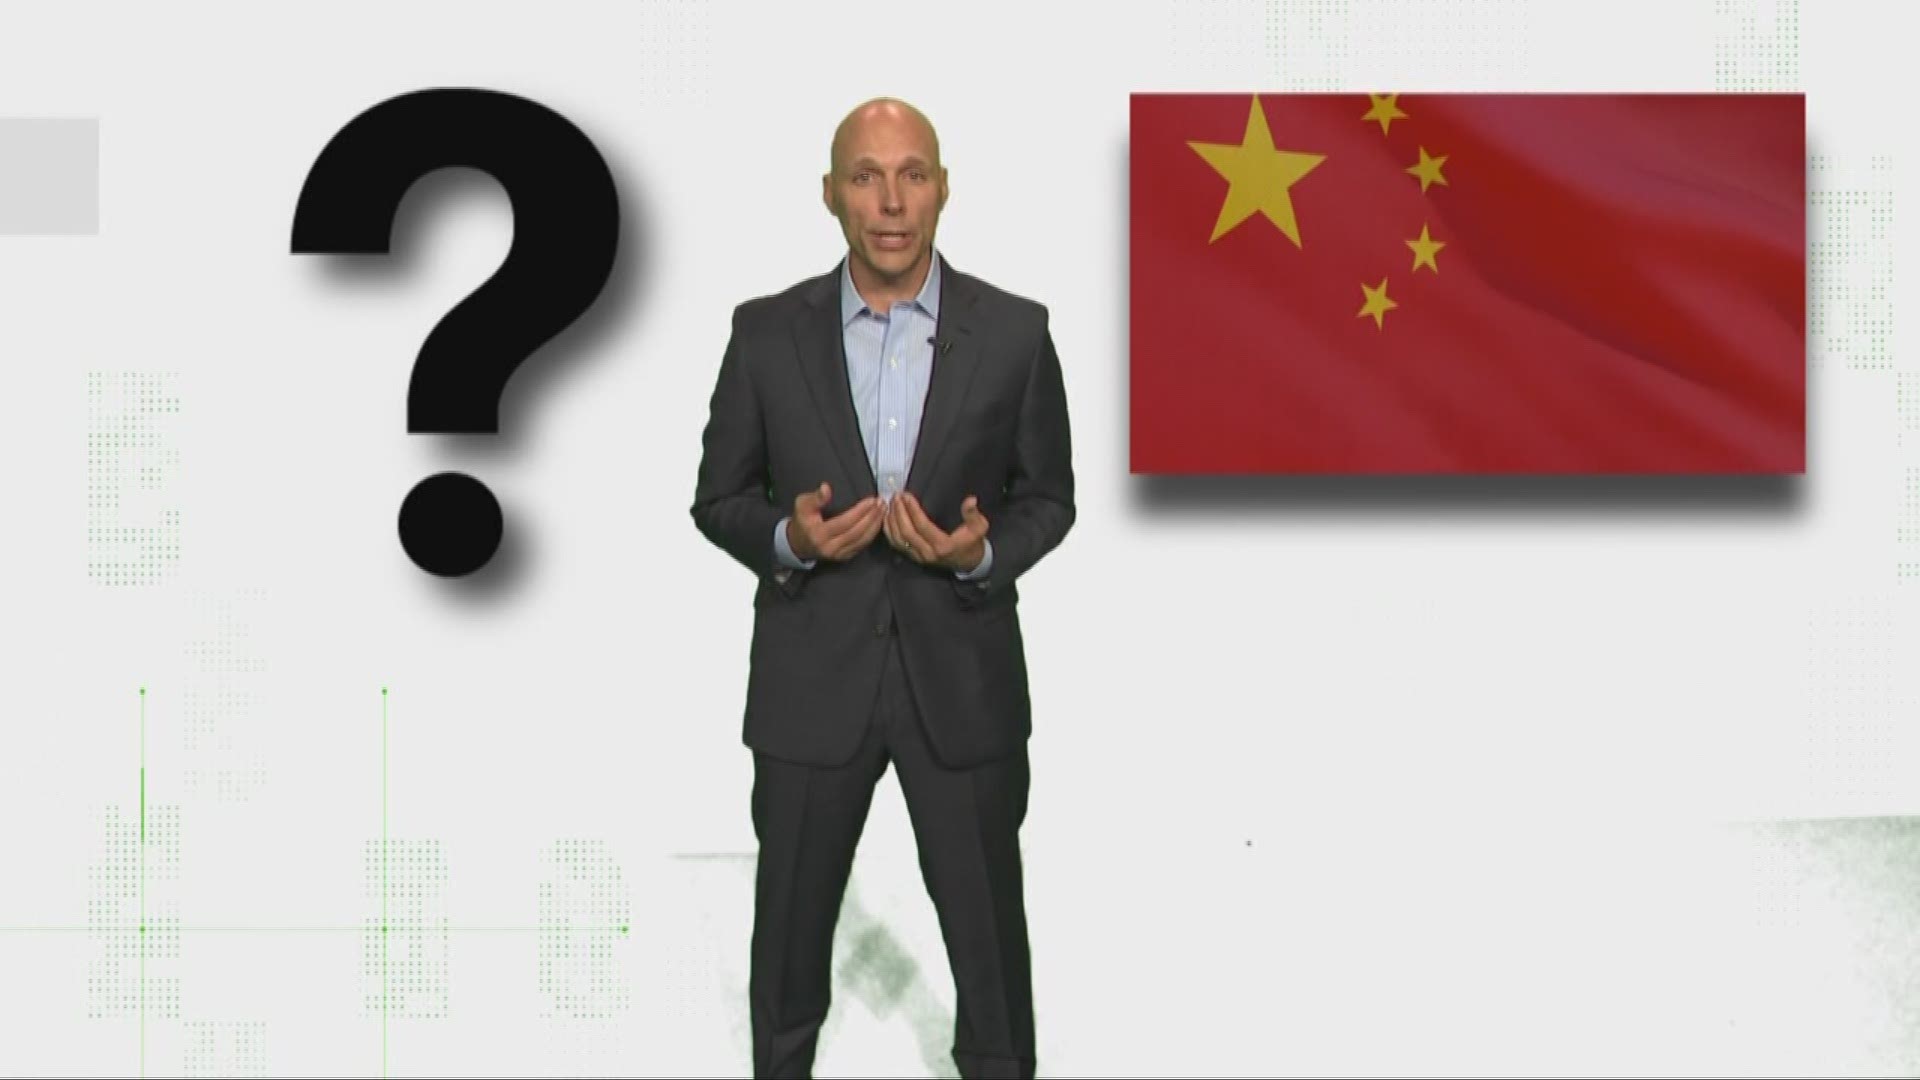 WKYC's Mark Naymik investigates a new ad airing across Ohio claiming China is attempting to take over the U.S. power grid.